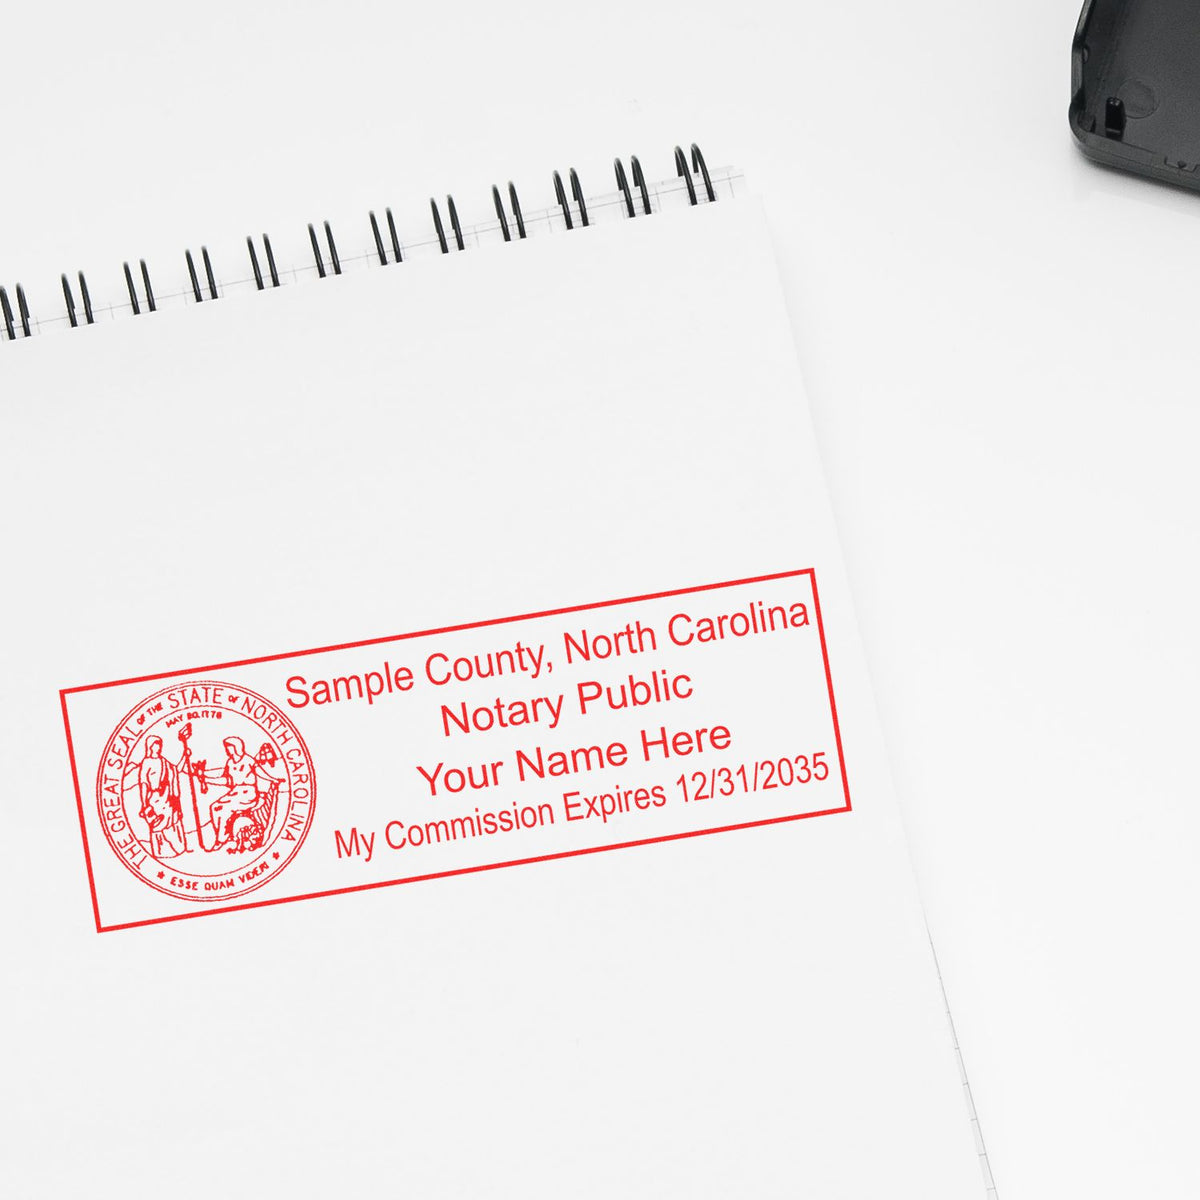 The Self-Inking State Seal North Carolina Notary Stamp stamp impression comes to life with a crisp, detailed photo on paper - showcasing true professional quality.